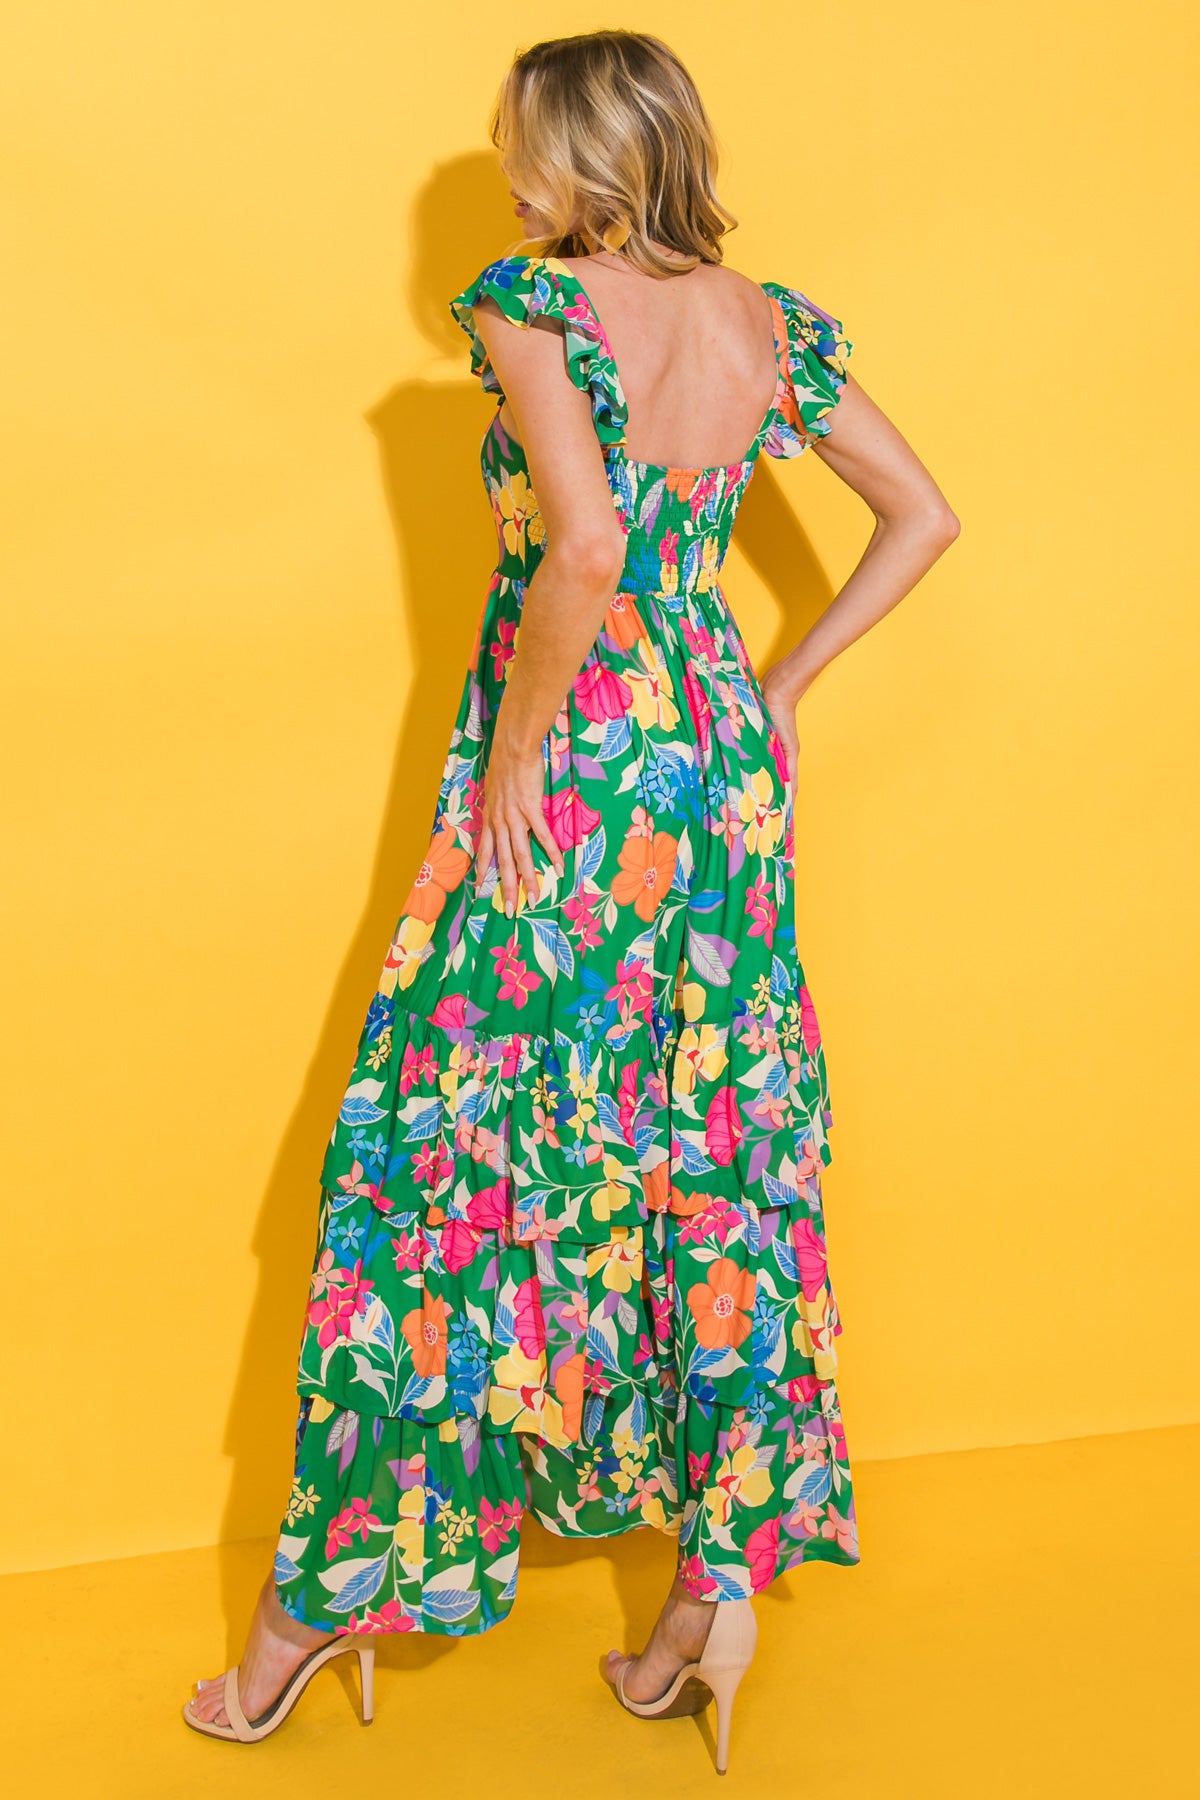 PRETTY IN PARADISE FLORAL WOVEN MAXI DRESS